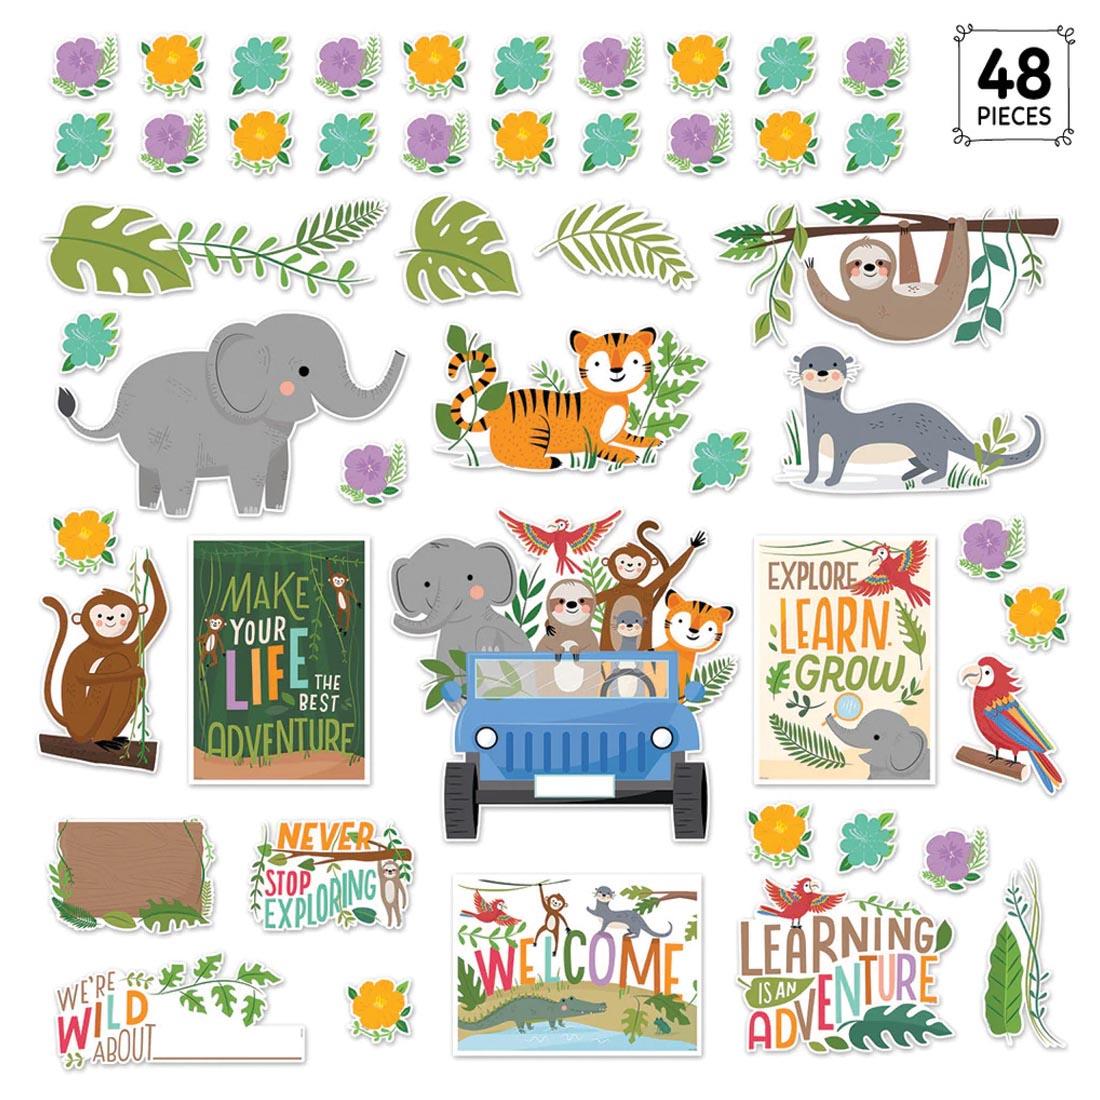 Bulletin Board Set from the Jungle Friends collection by Creative Teaching Press with the text 48 PIECES